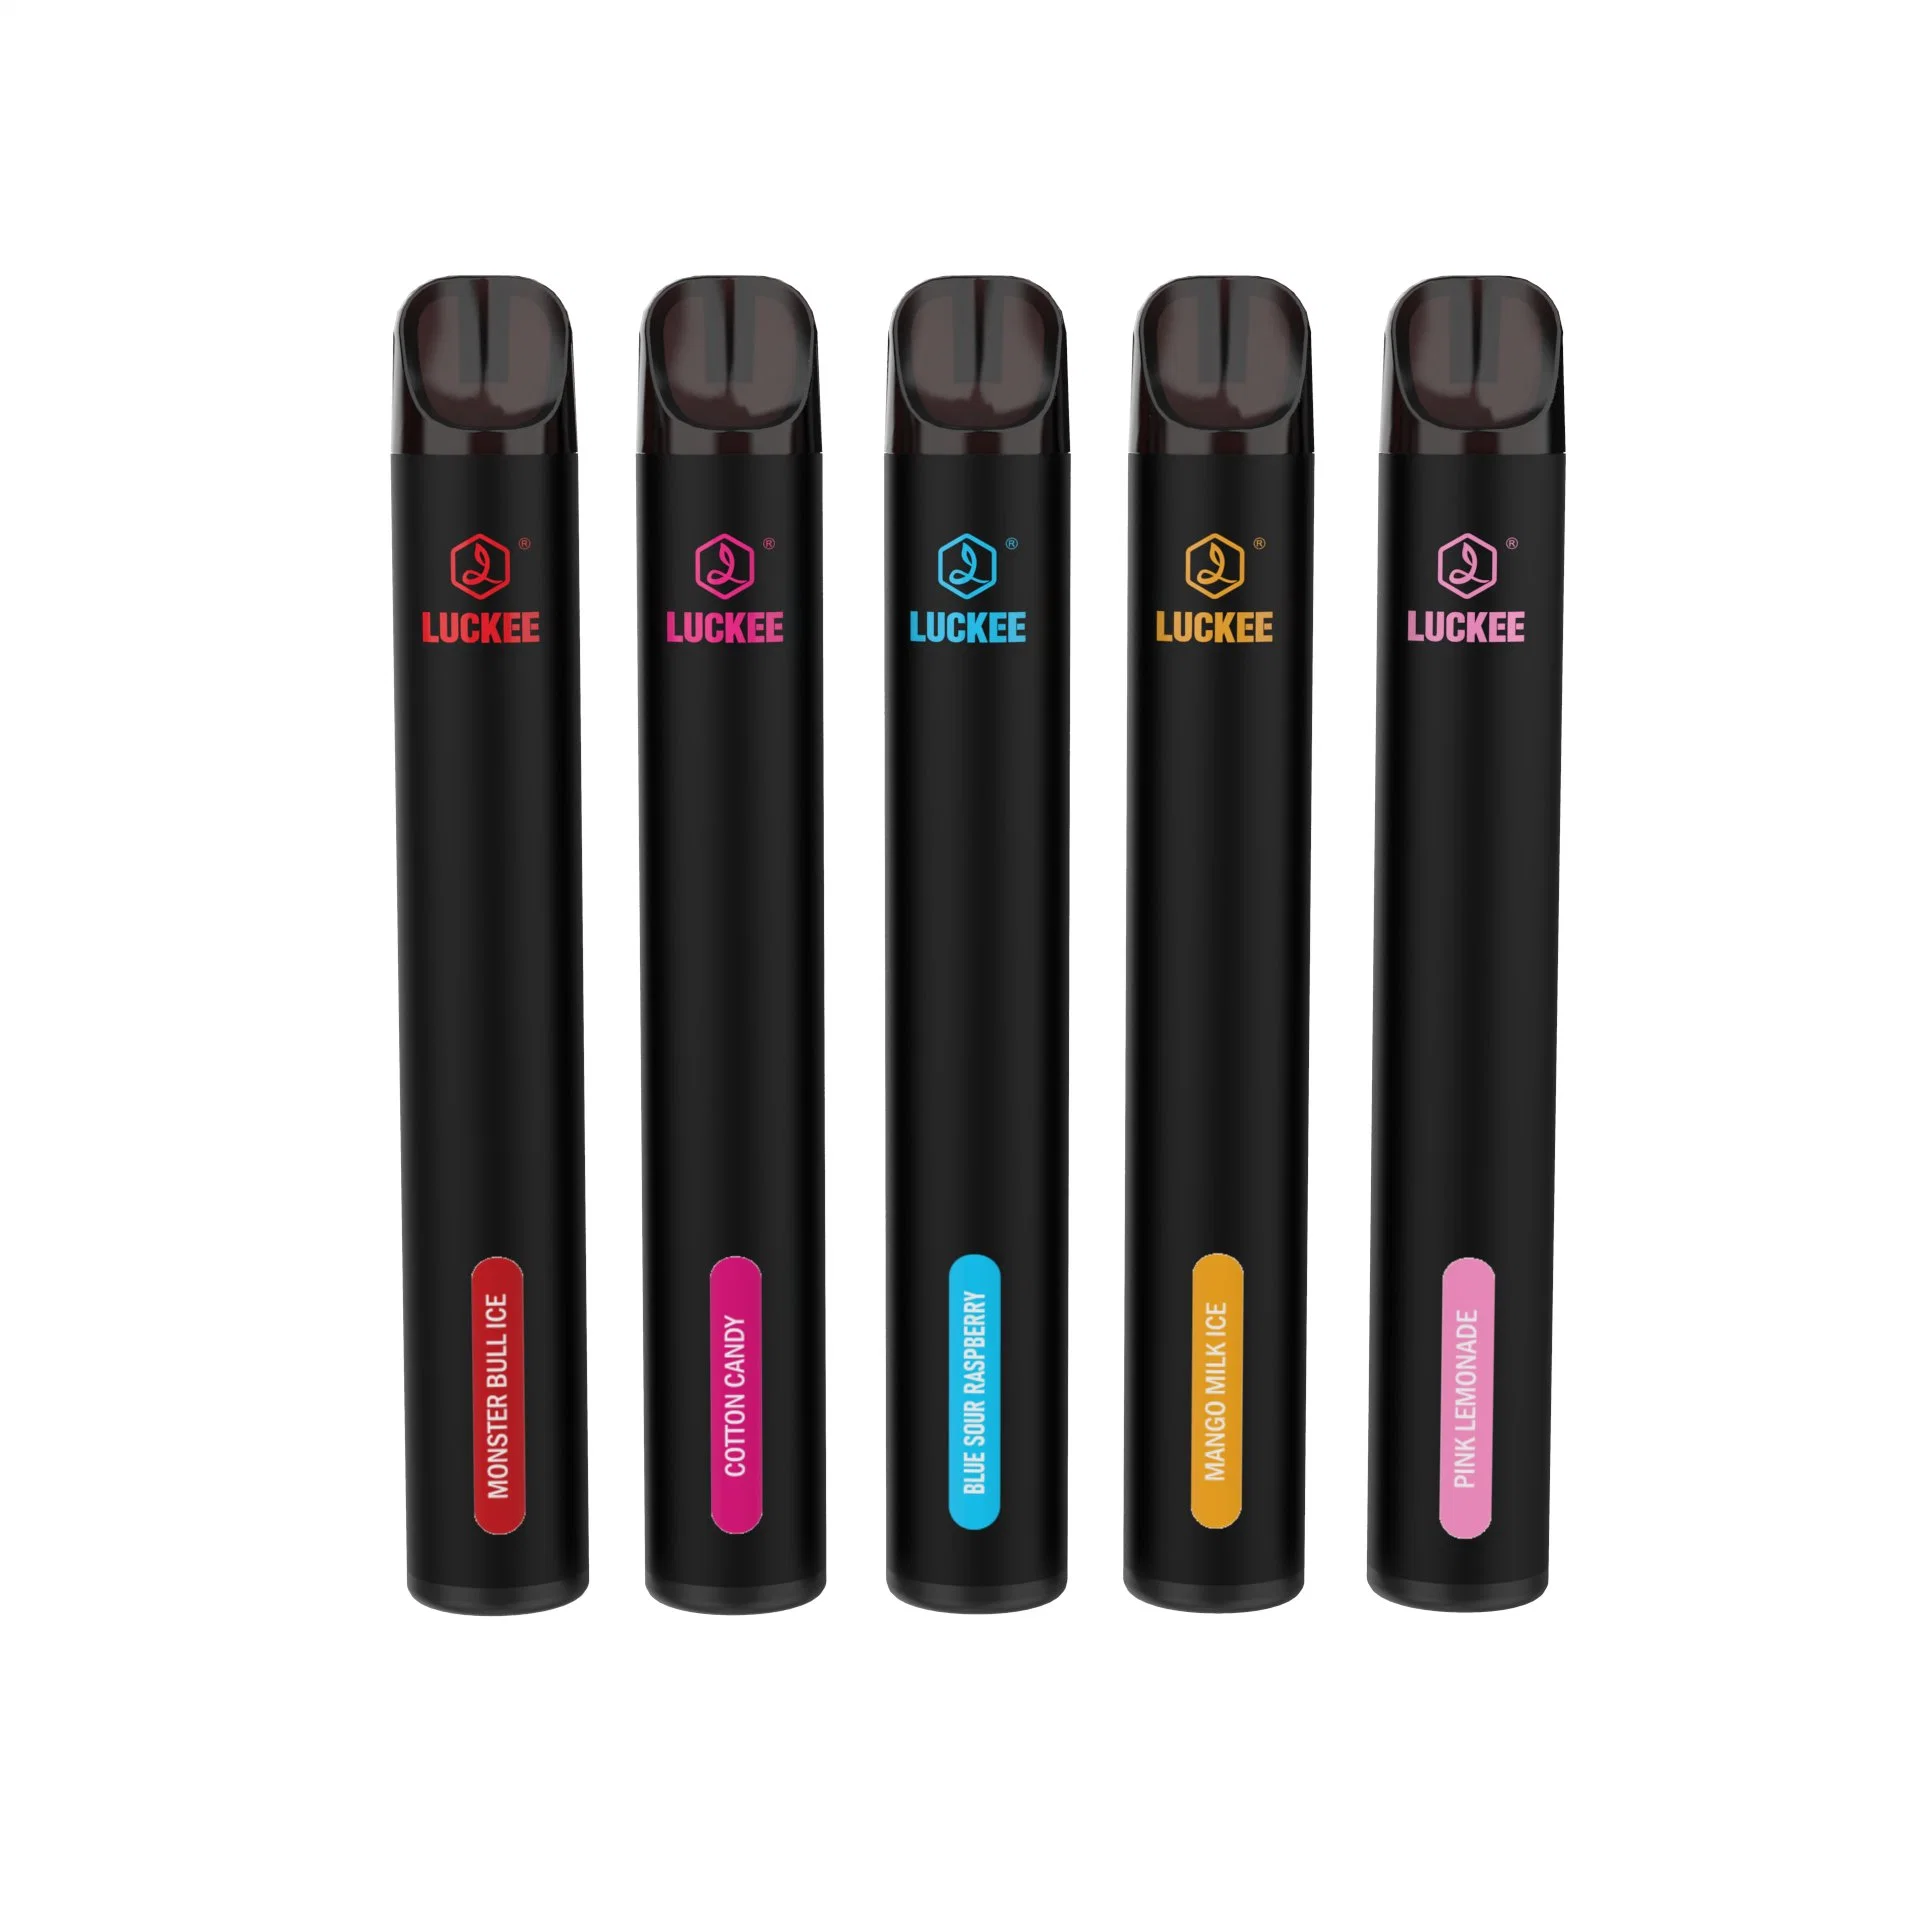 New Strending 500mAh Wholesale I Vape 600 Puffs 2% Salt Nic with Tpd Certificate